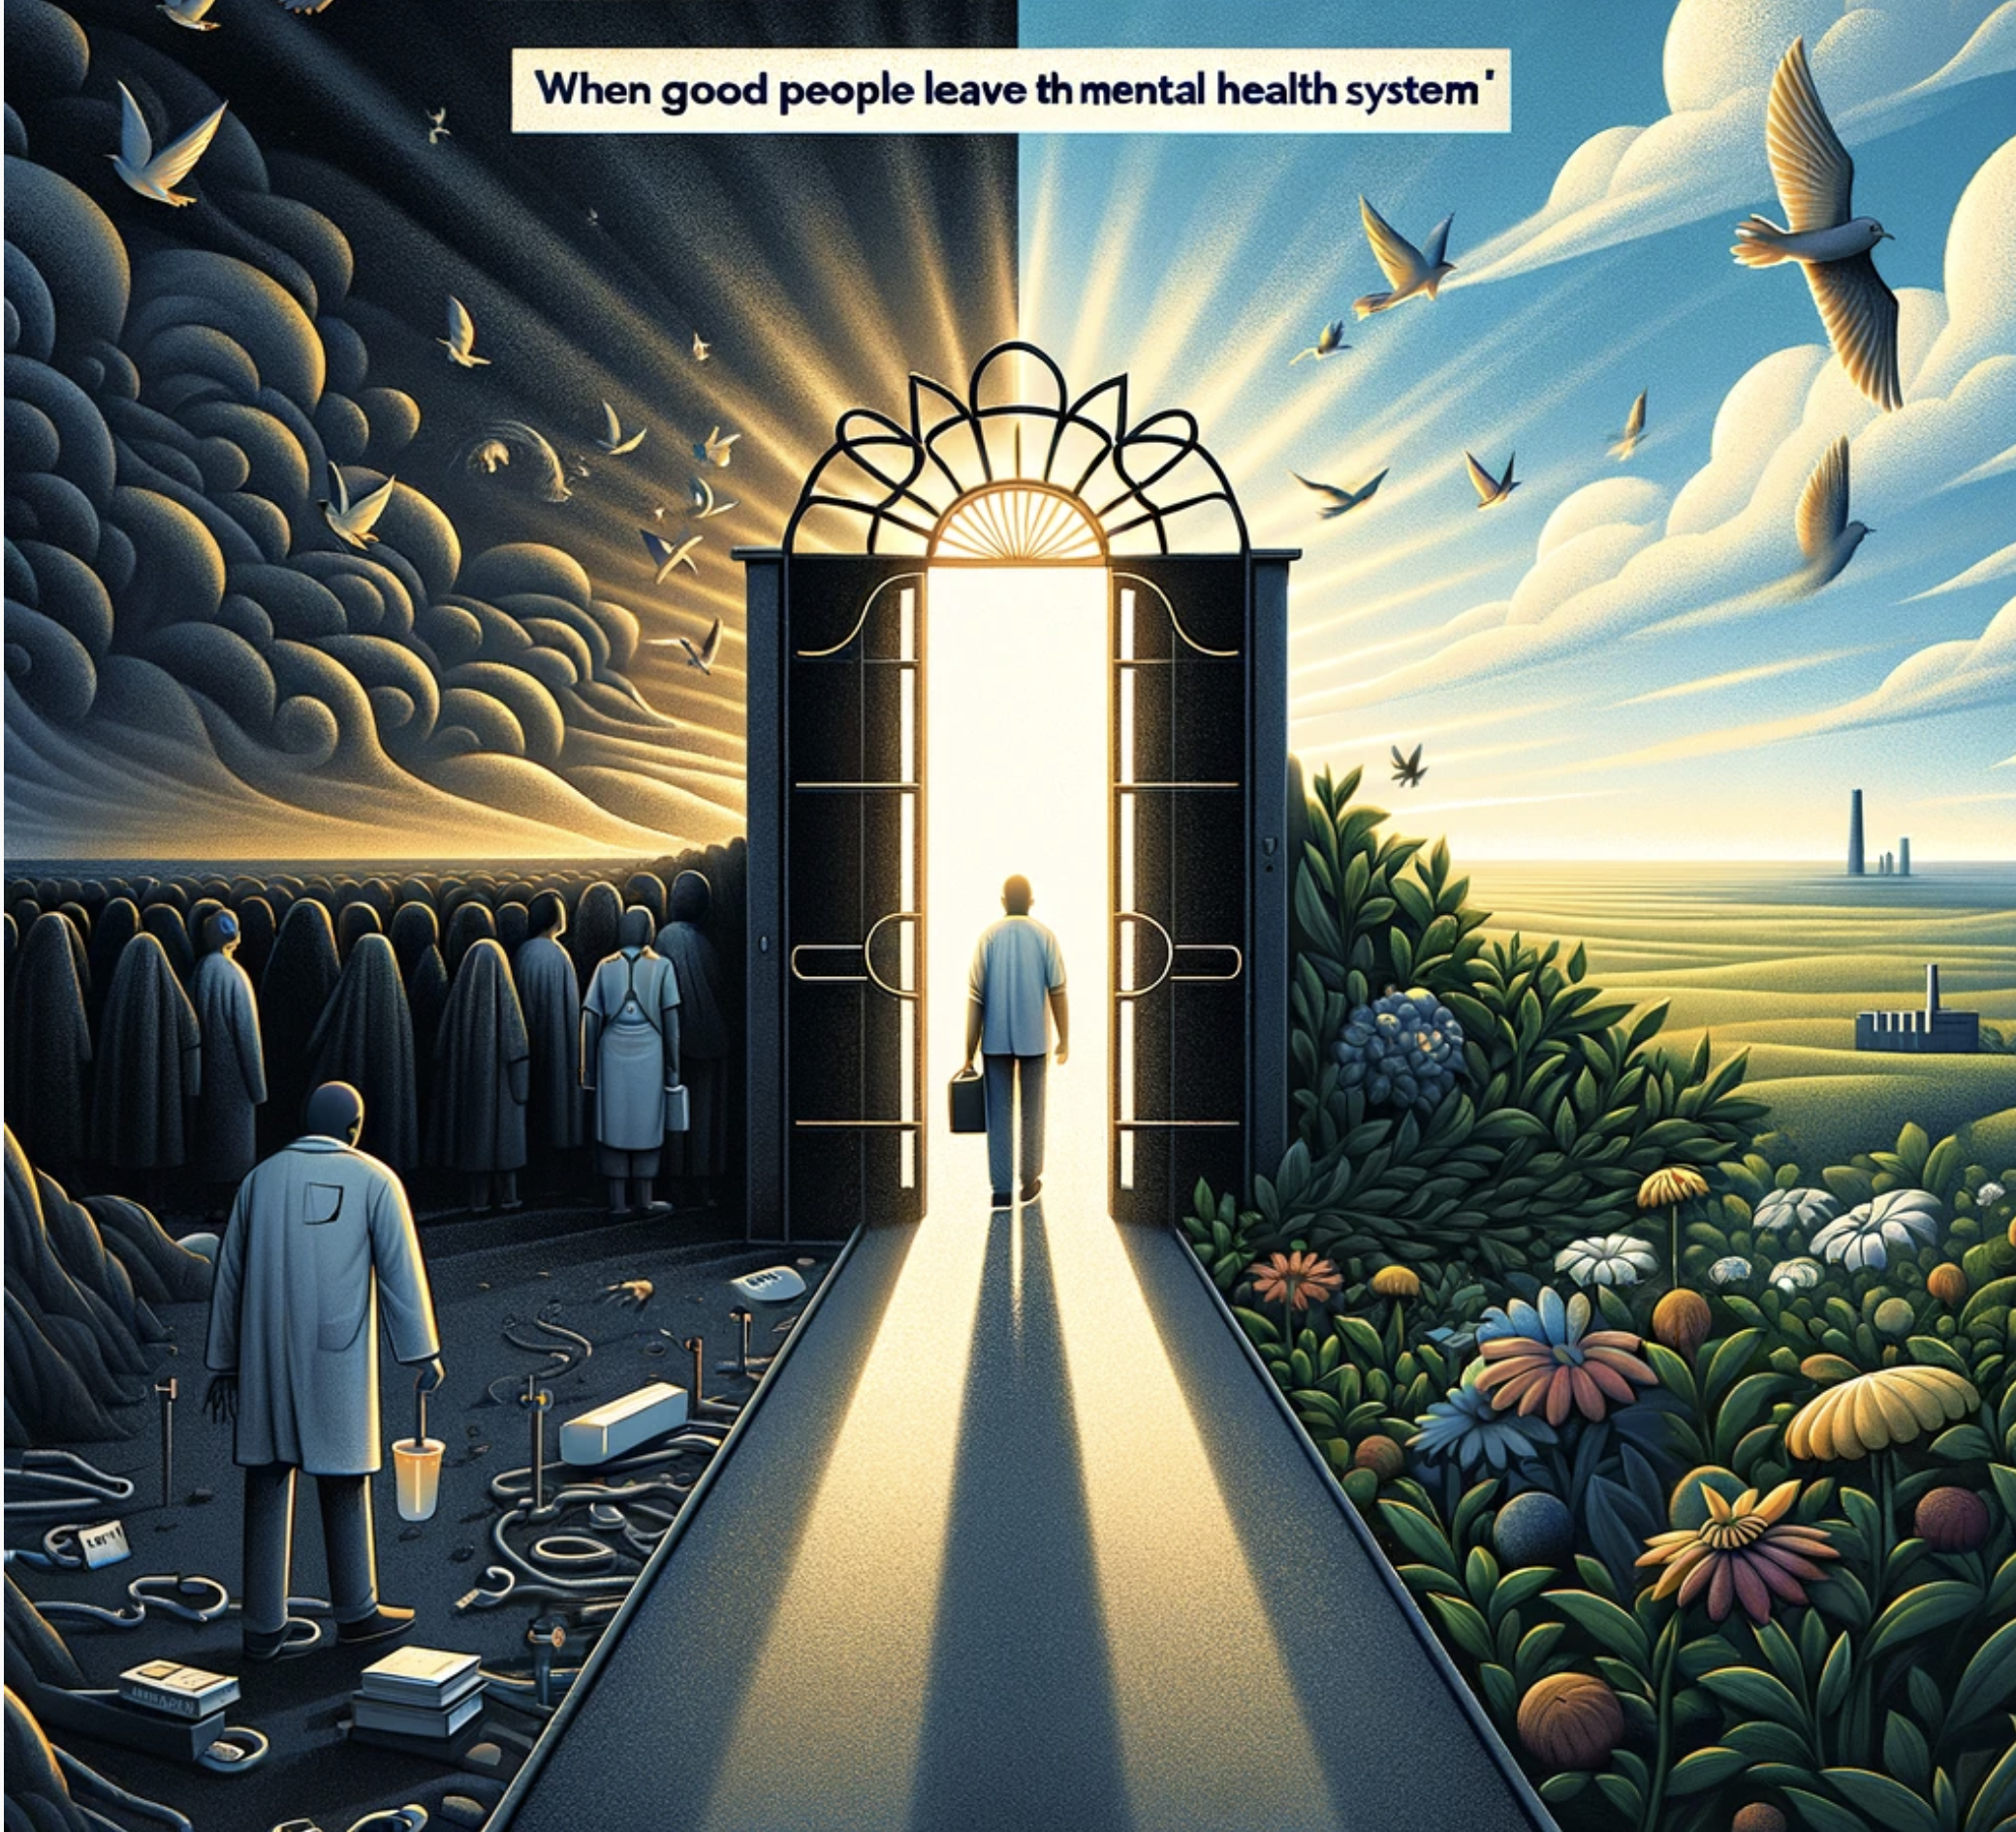 The Exodus of Compassion: When Good People Leave the Mental Health System